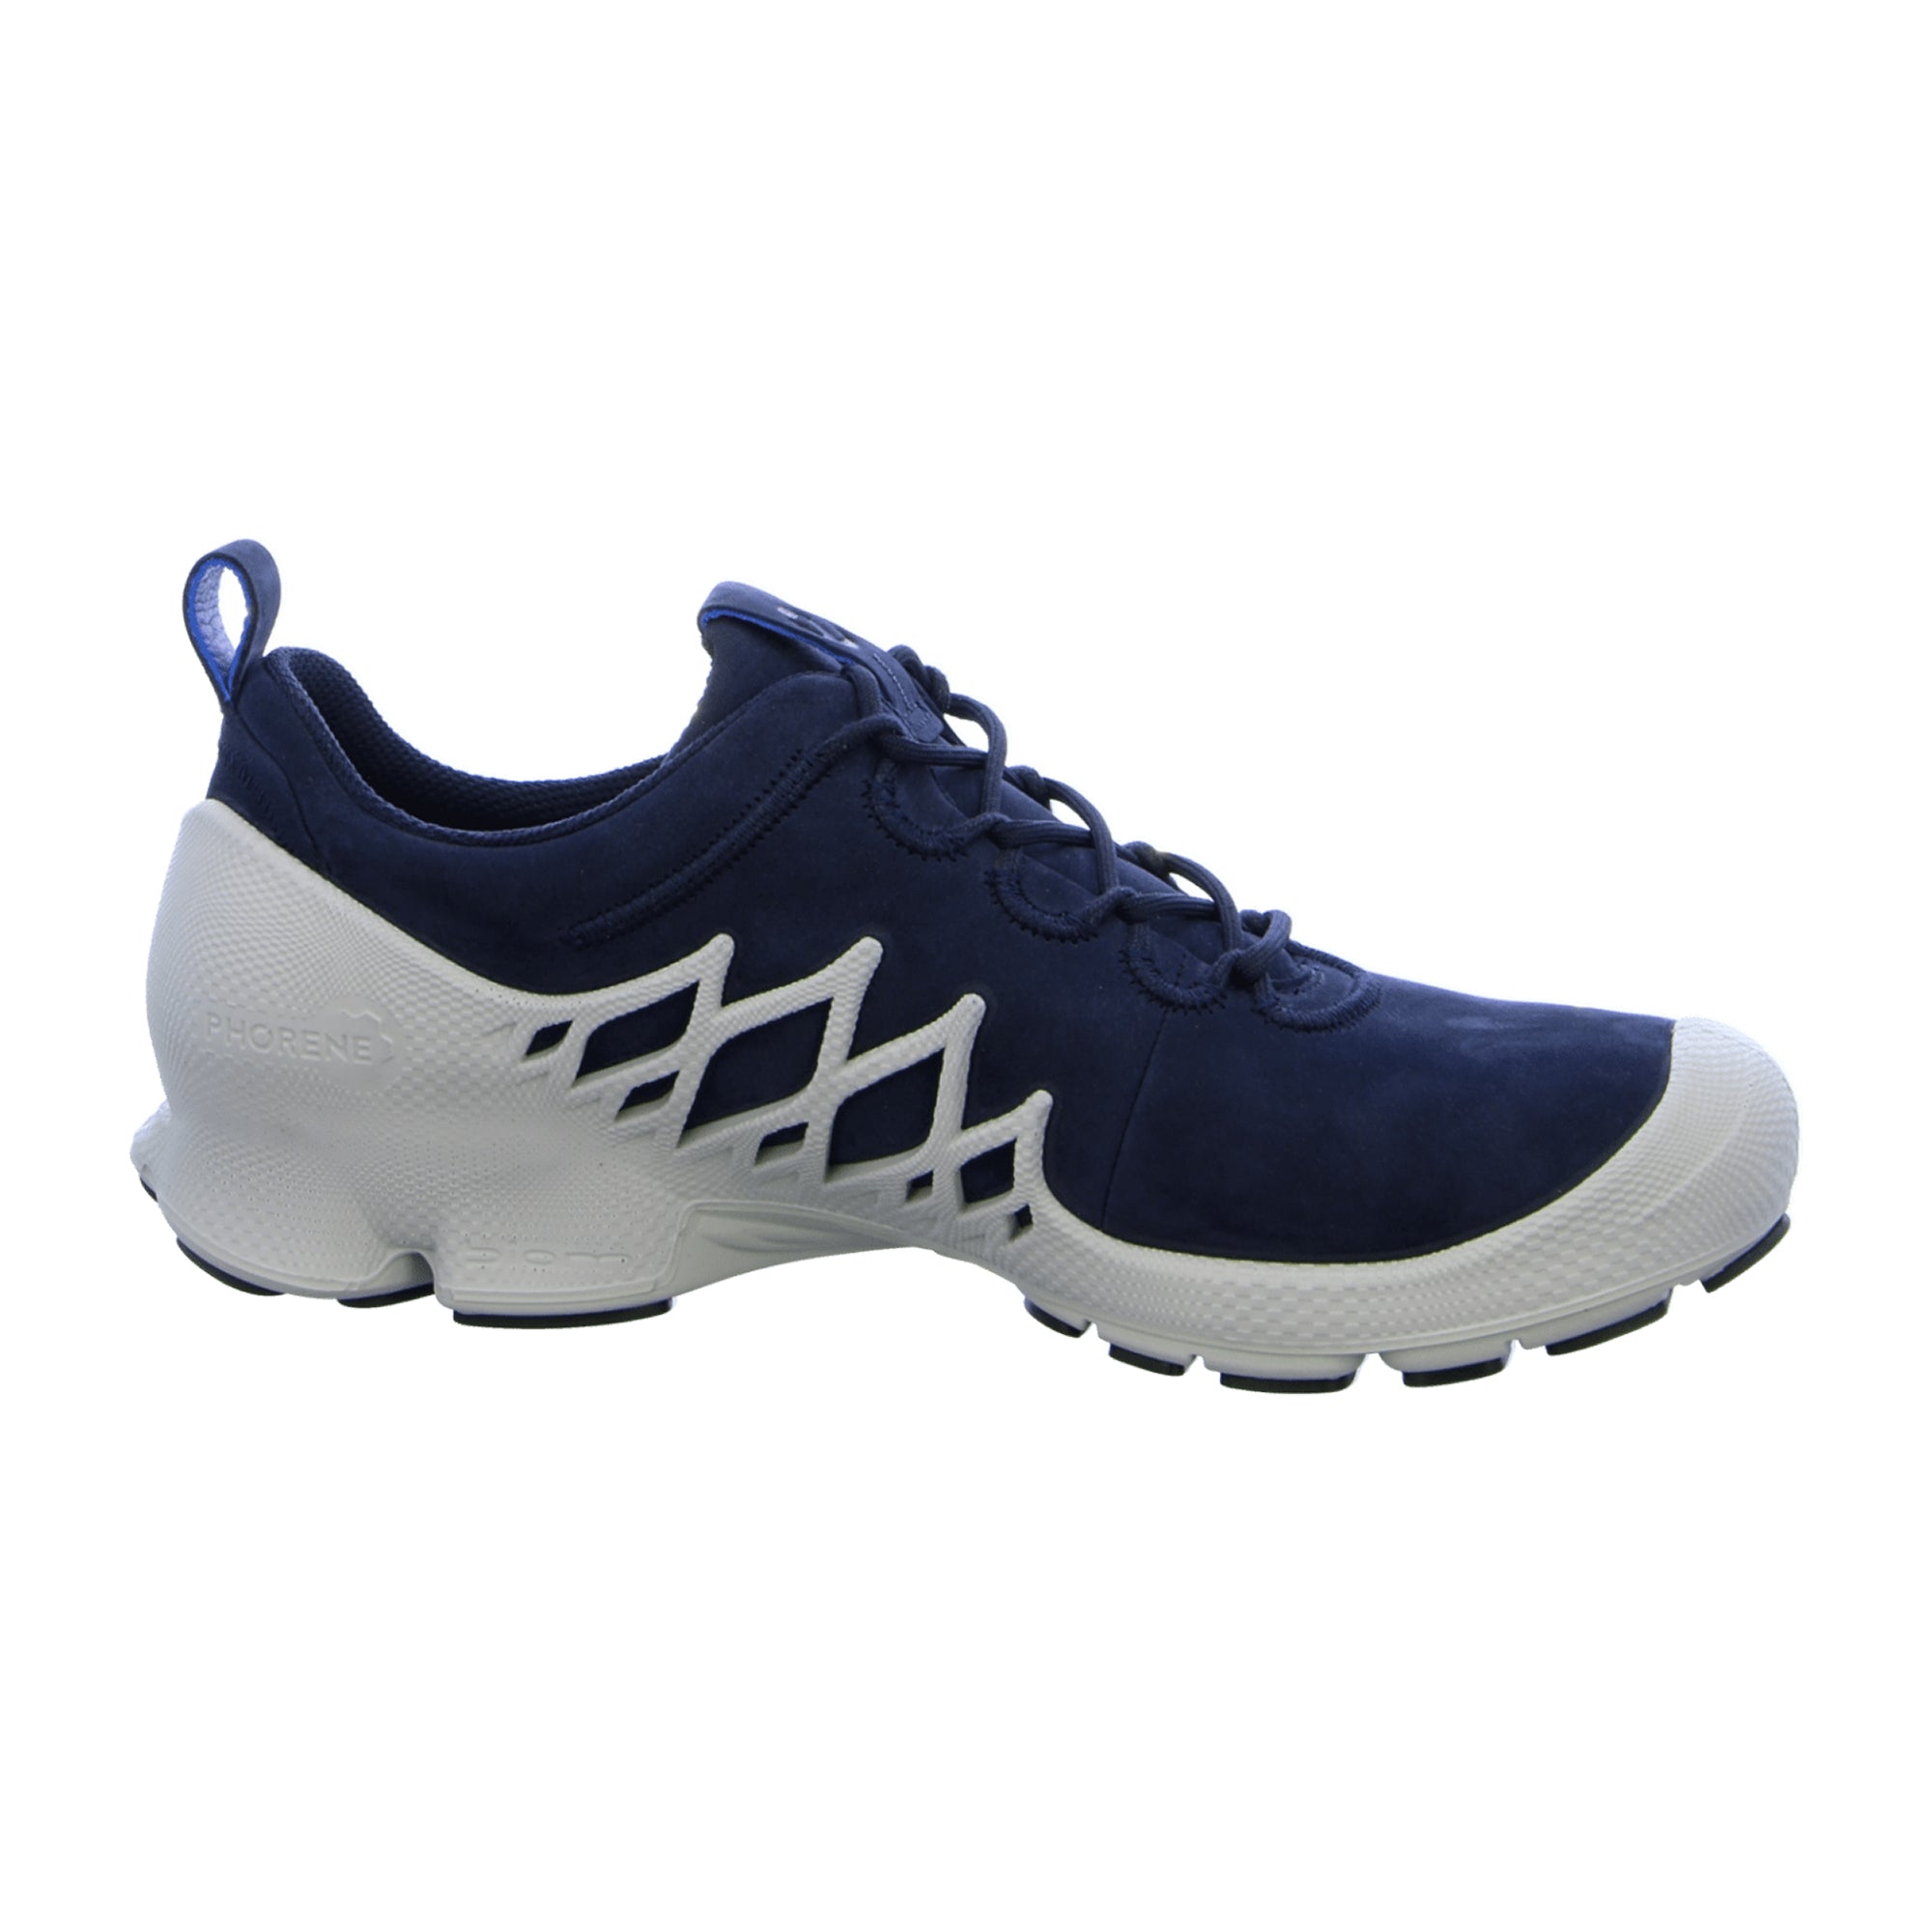 Ecco BIOM AEX Men's Sneakers Night Blue - Durable & Stylish Athletic Shoes